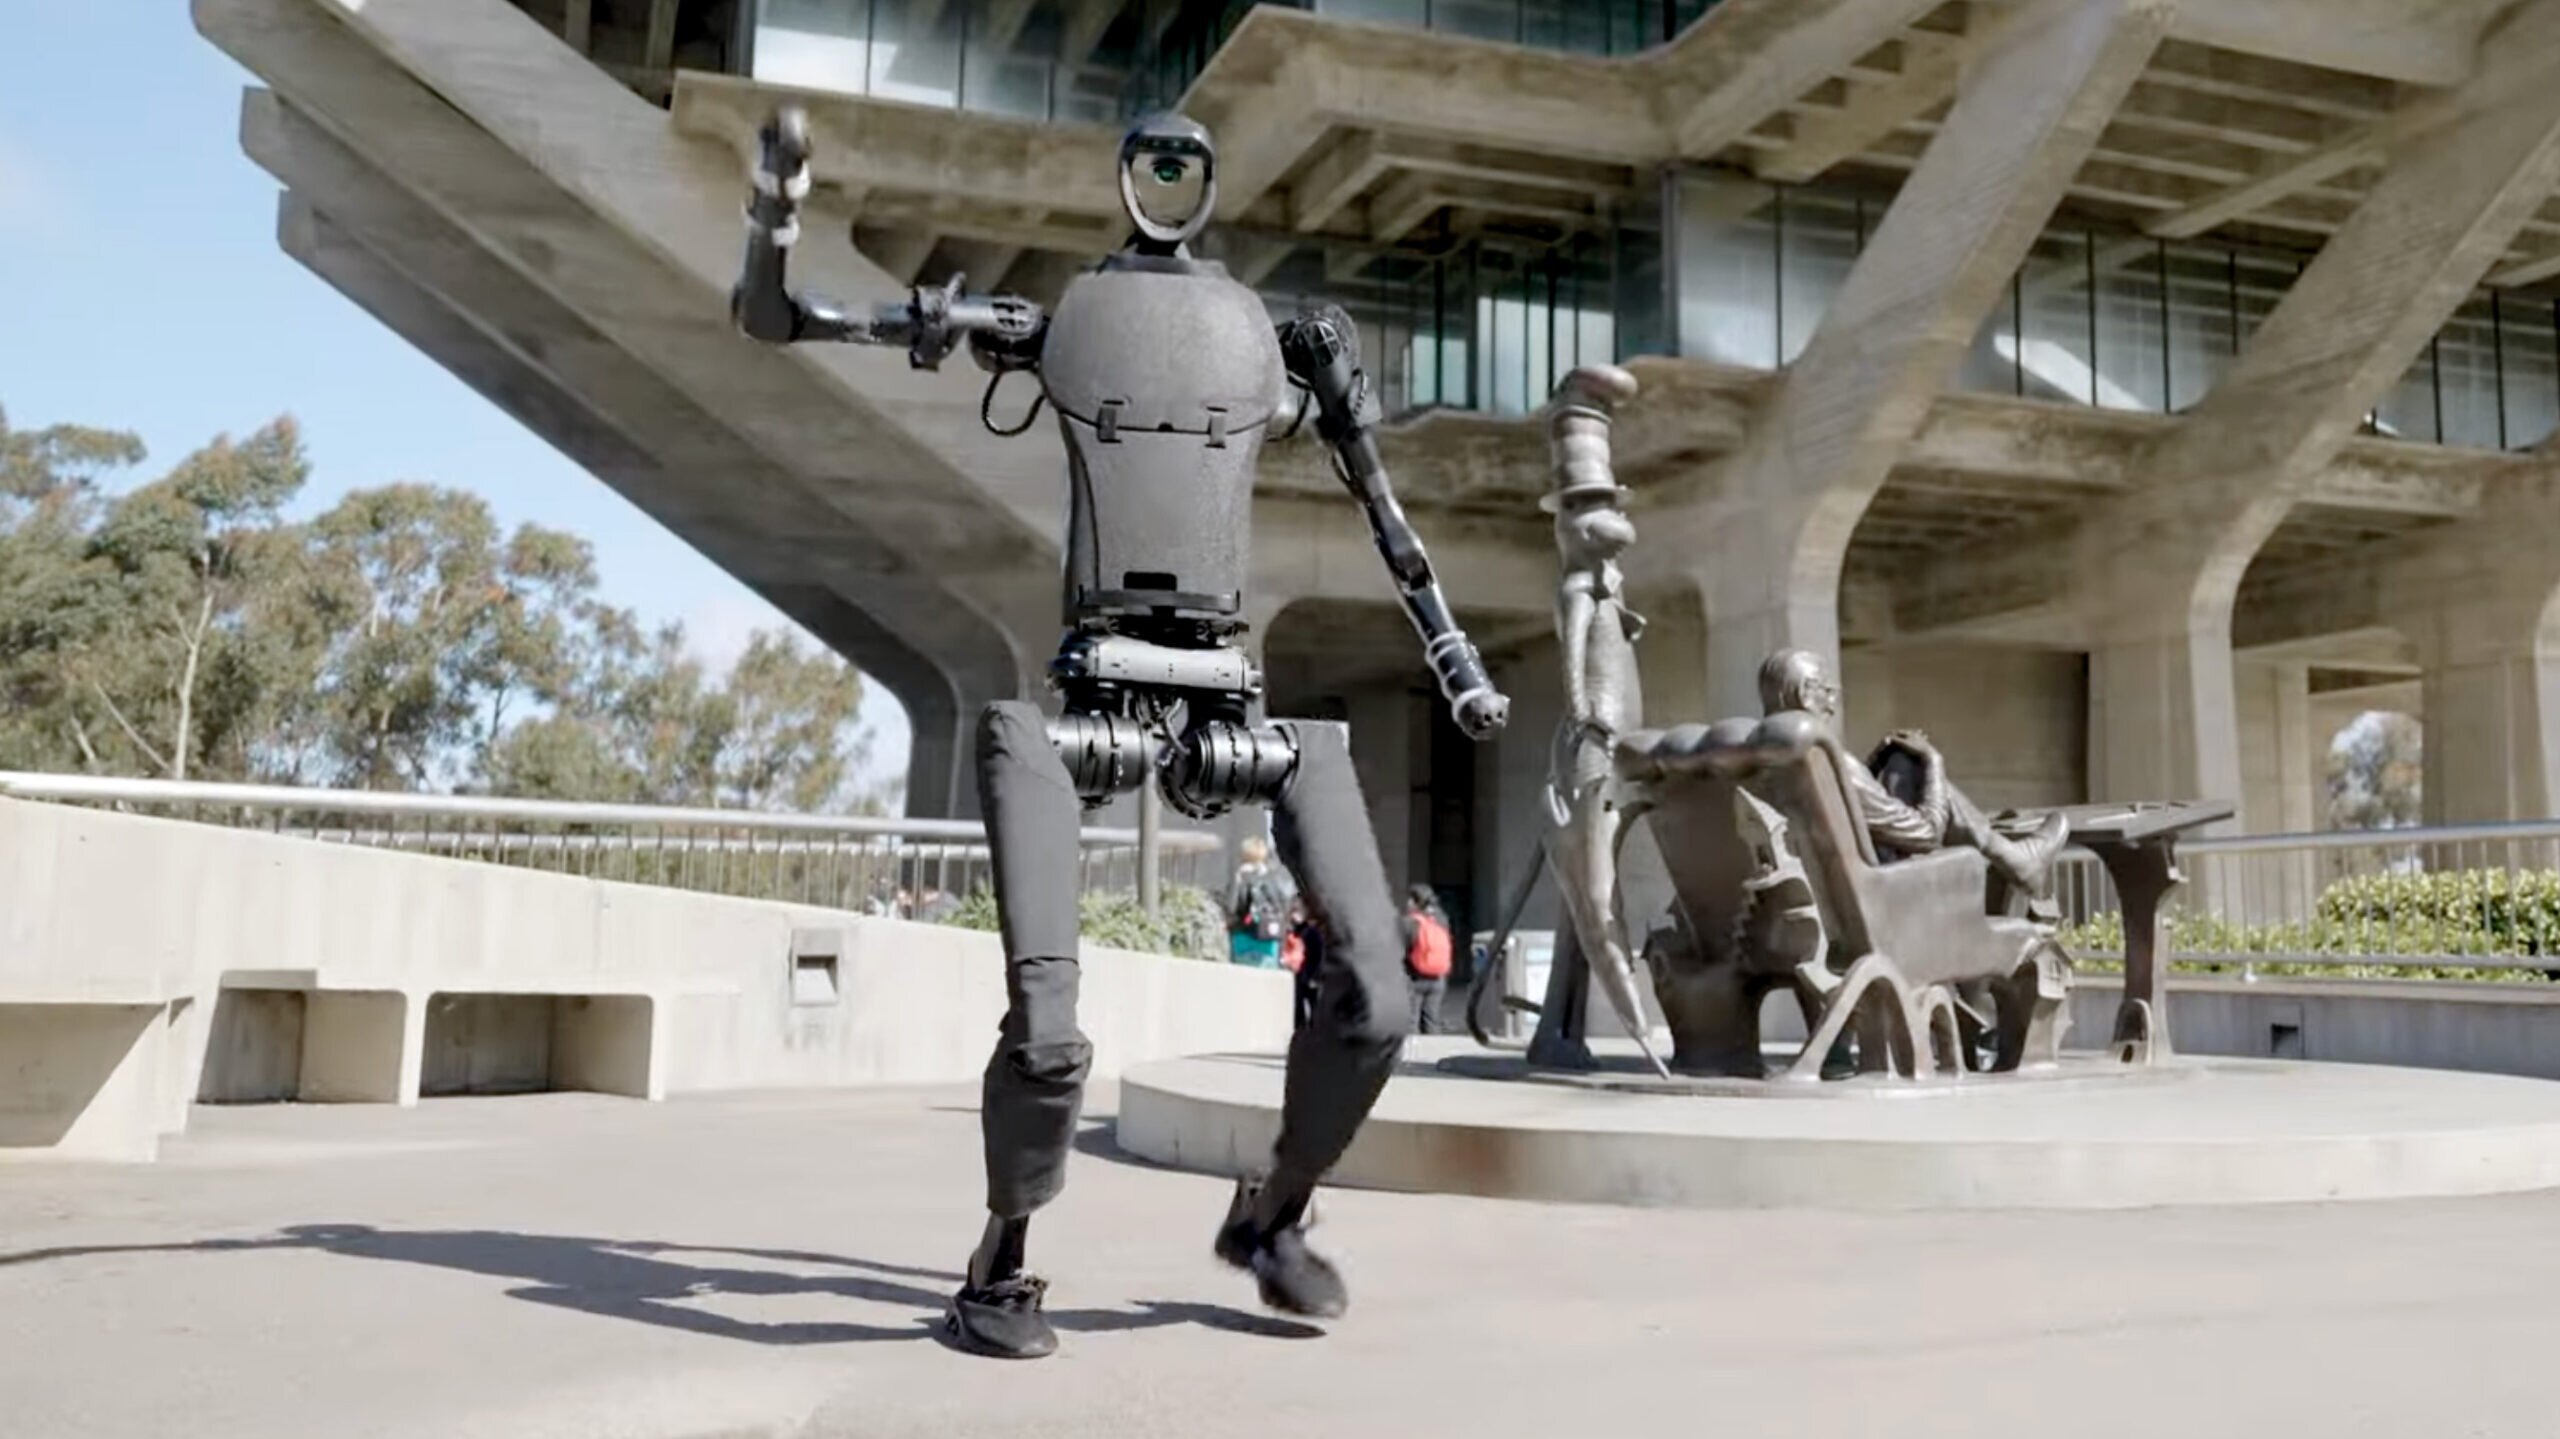 Robot Dance Lessons Could Make Them More Agile and Less Scary